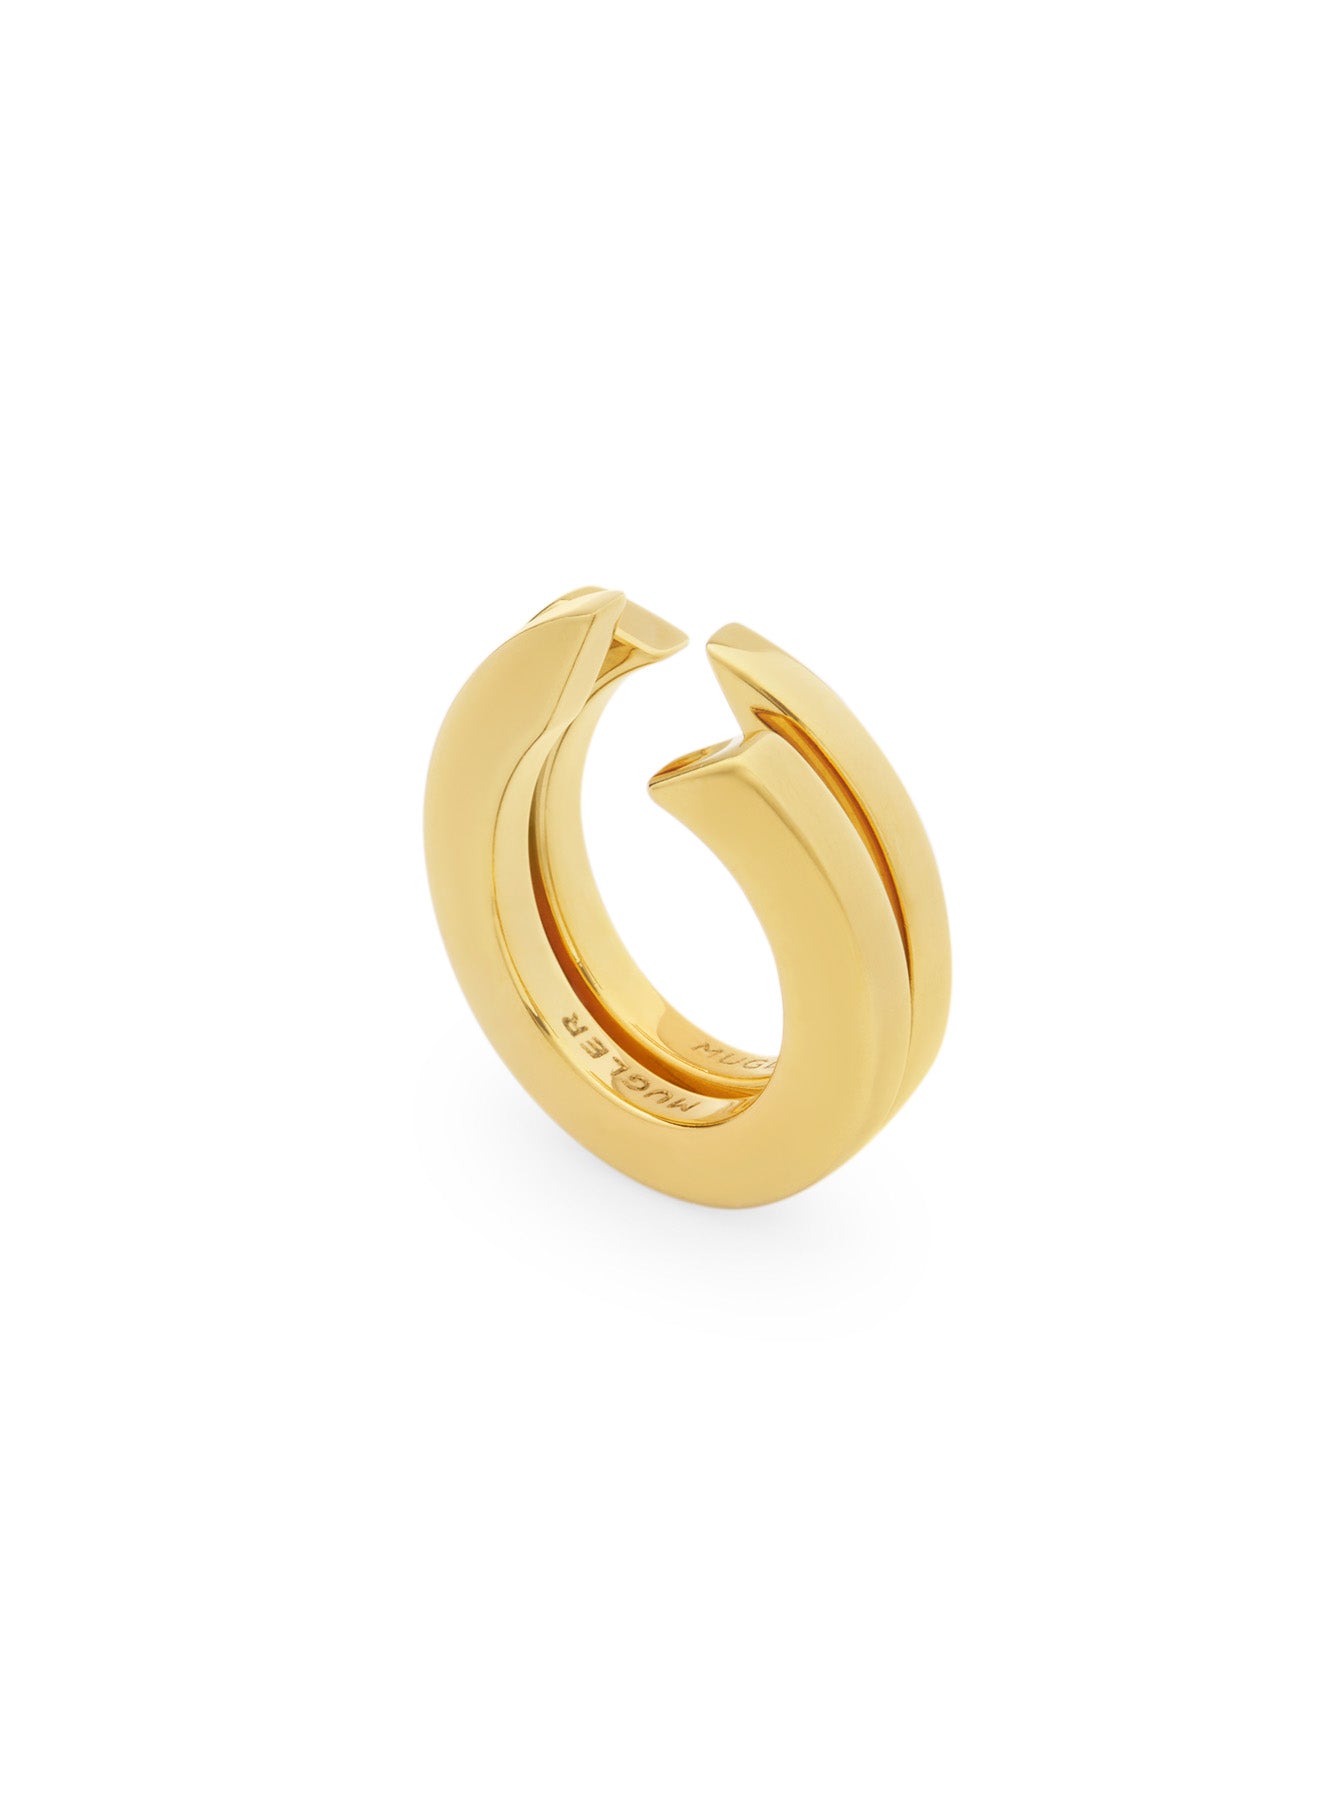 Gold intertwined ring